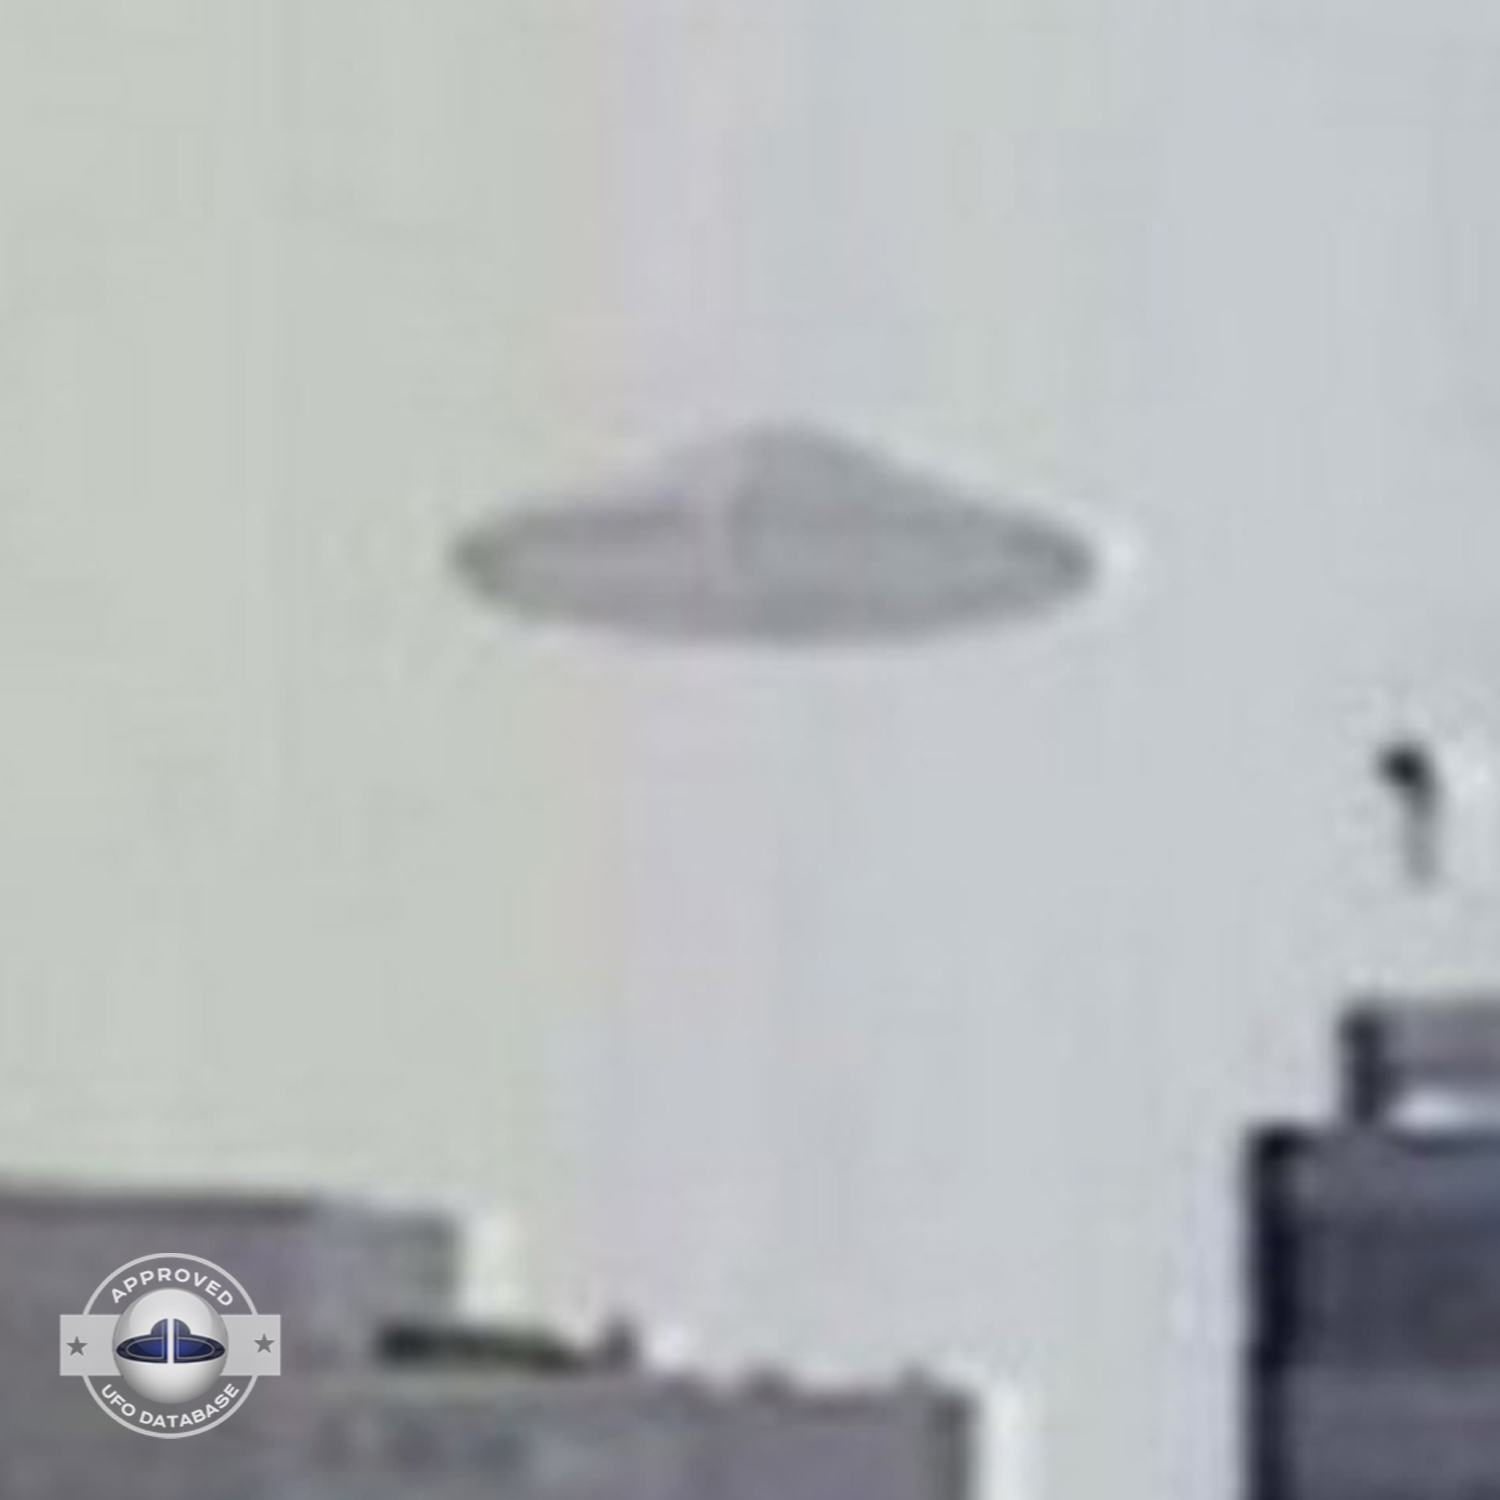 Mexico city August 6 1997 UFO Pictures from famous video (UFOdB.com) UFO Picture #55-4